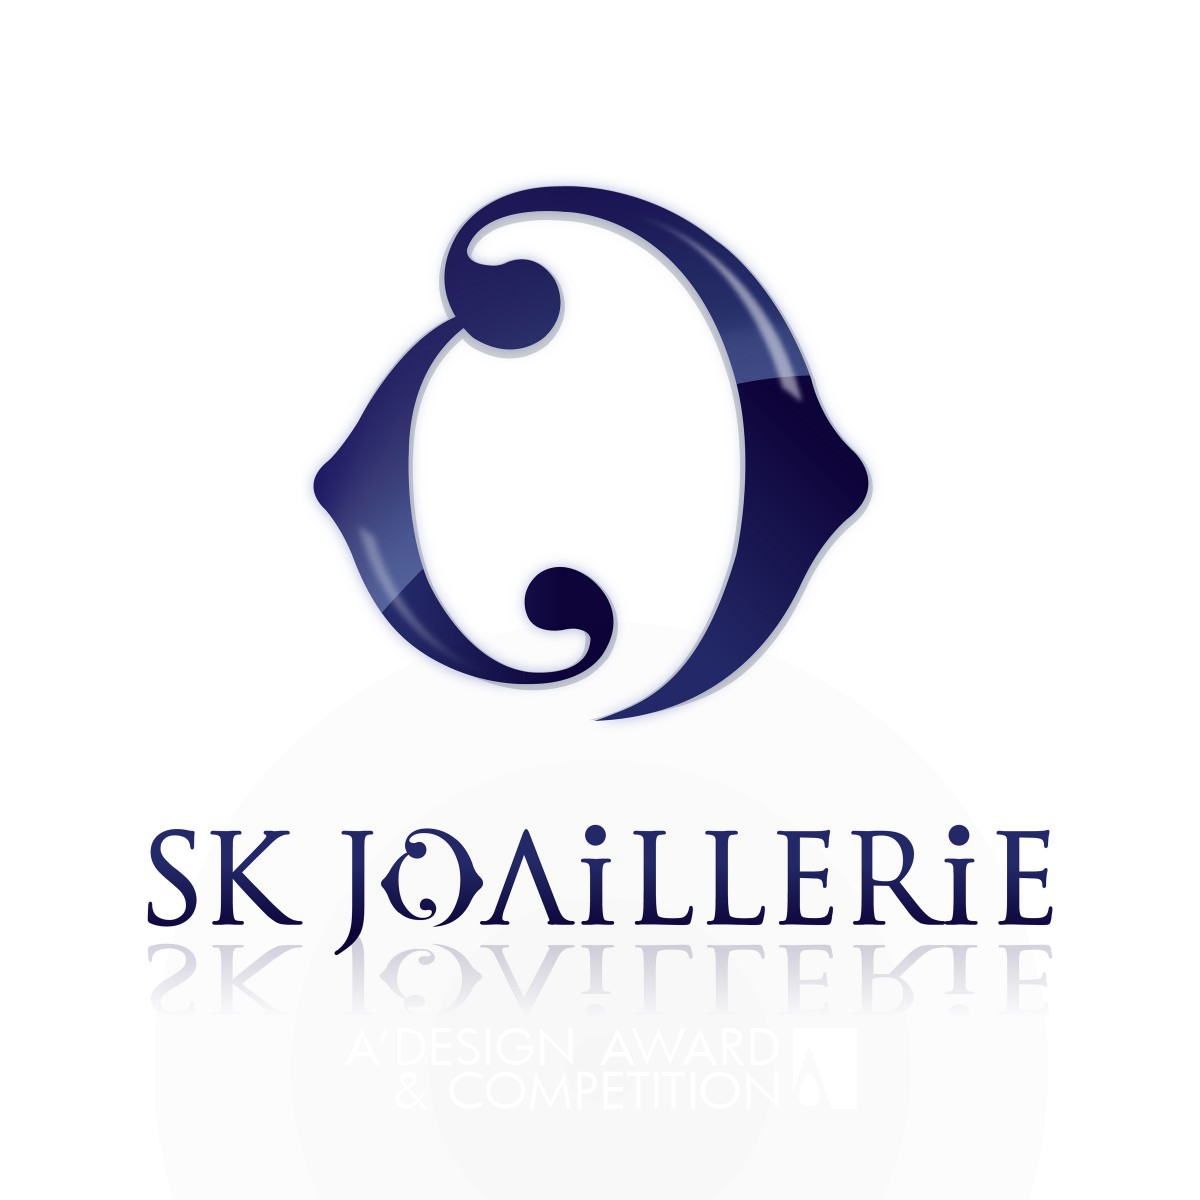 SK Joaillerie Corporate Identity by Miko Lim